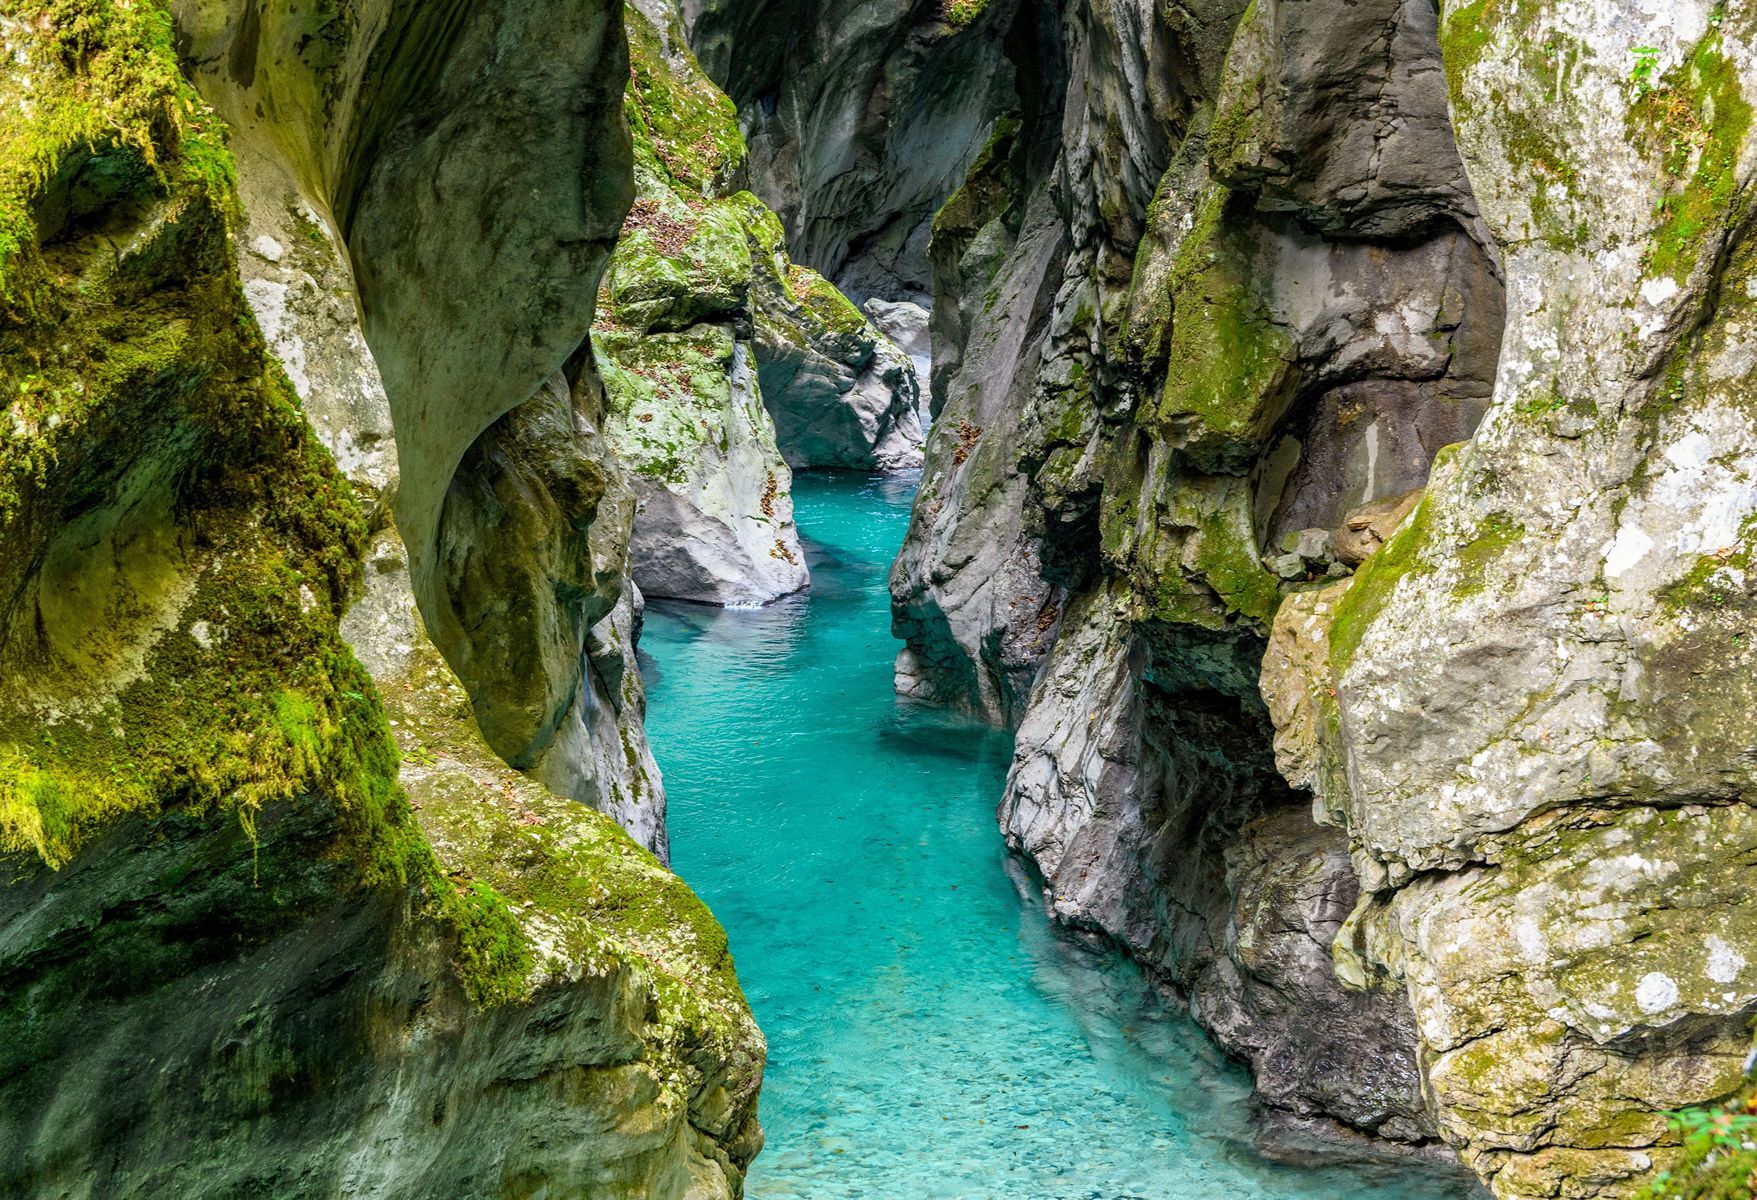 <p>Considered one of the most beautiful gateways to Triglav National Park, the <a href="https://www.soca-valley.com/en/attraction/tolmin-gorges/">Tolmin Gorges</a> are a magical spot where the sparkling waters of the Tolminka River slice through the area’s steep cliffs. Walk across Devil’s Bridge and into Dante’s Cave, which offers a cool respite on hot summer days.</p>